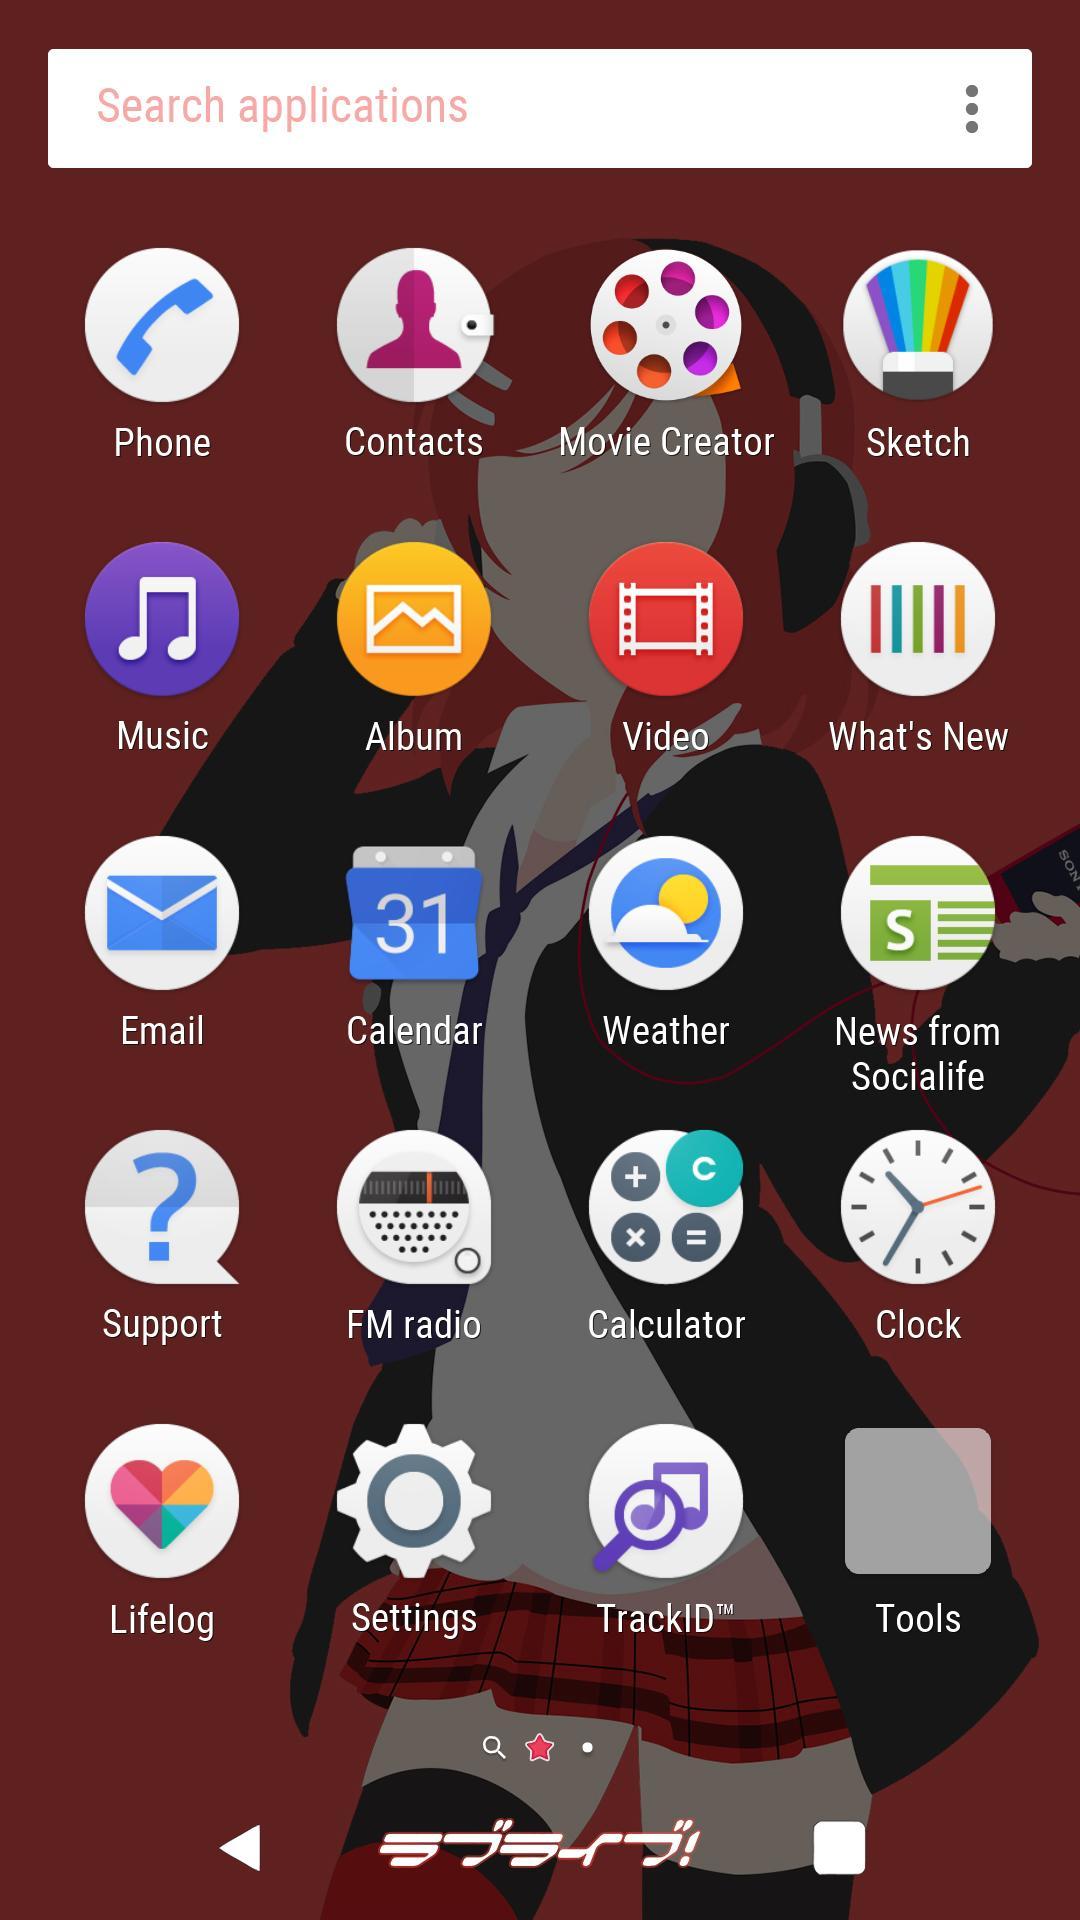 Android application 西木野真姬 - Xperia Theme screenshort